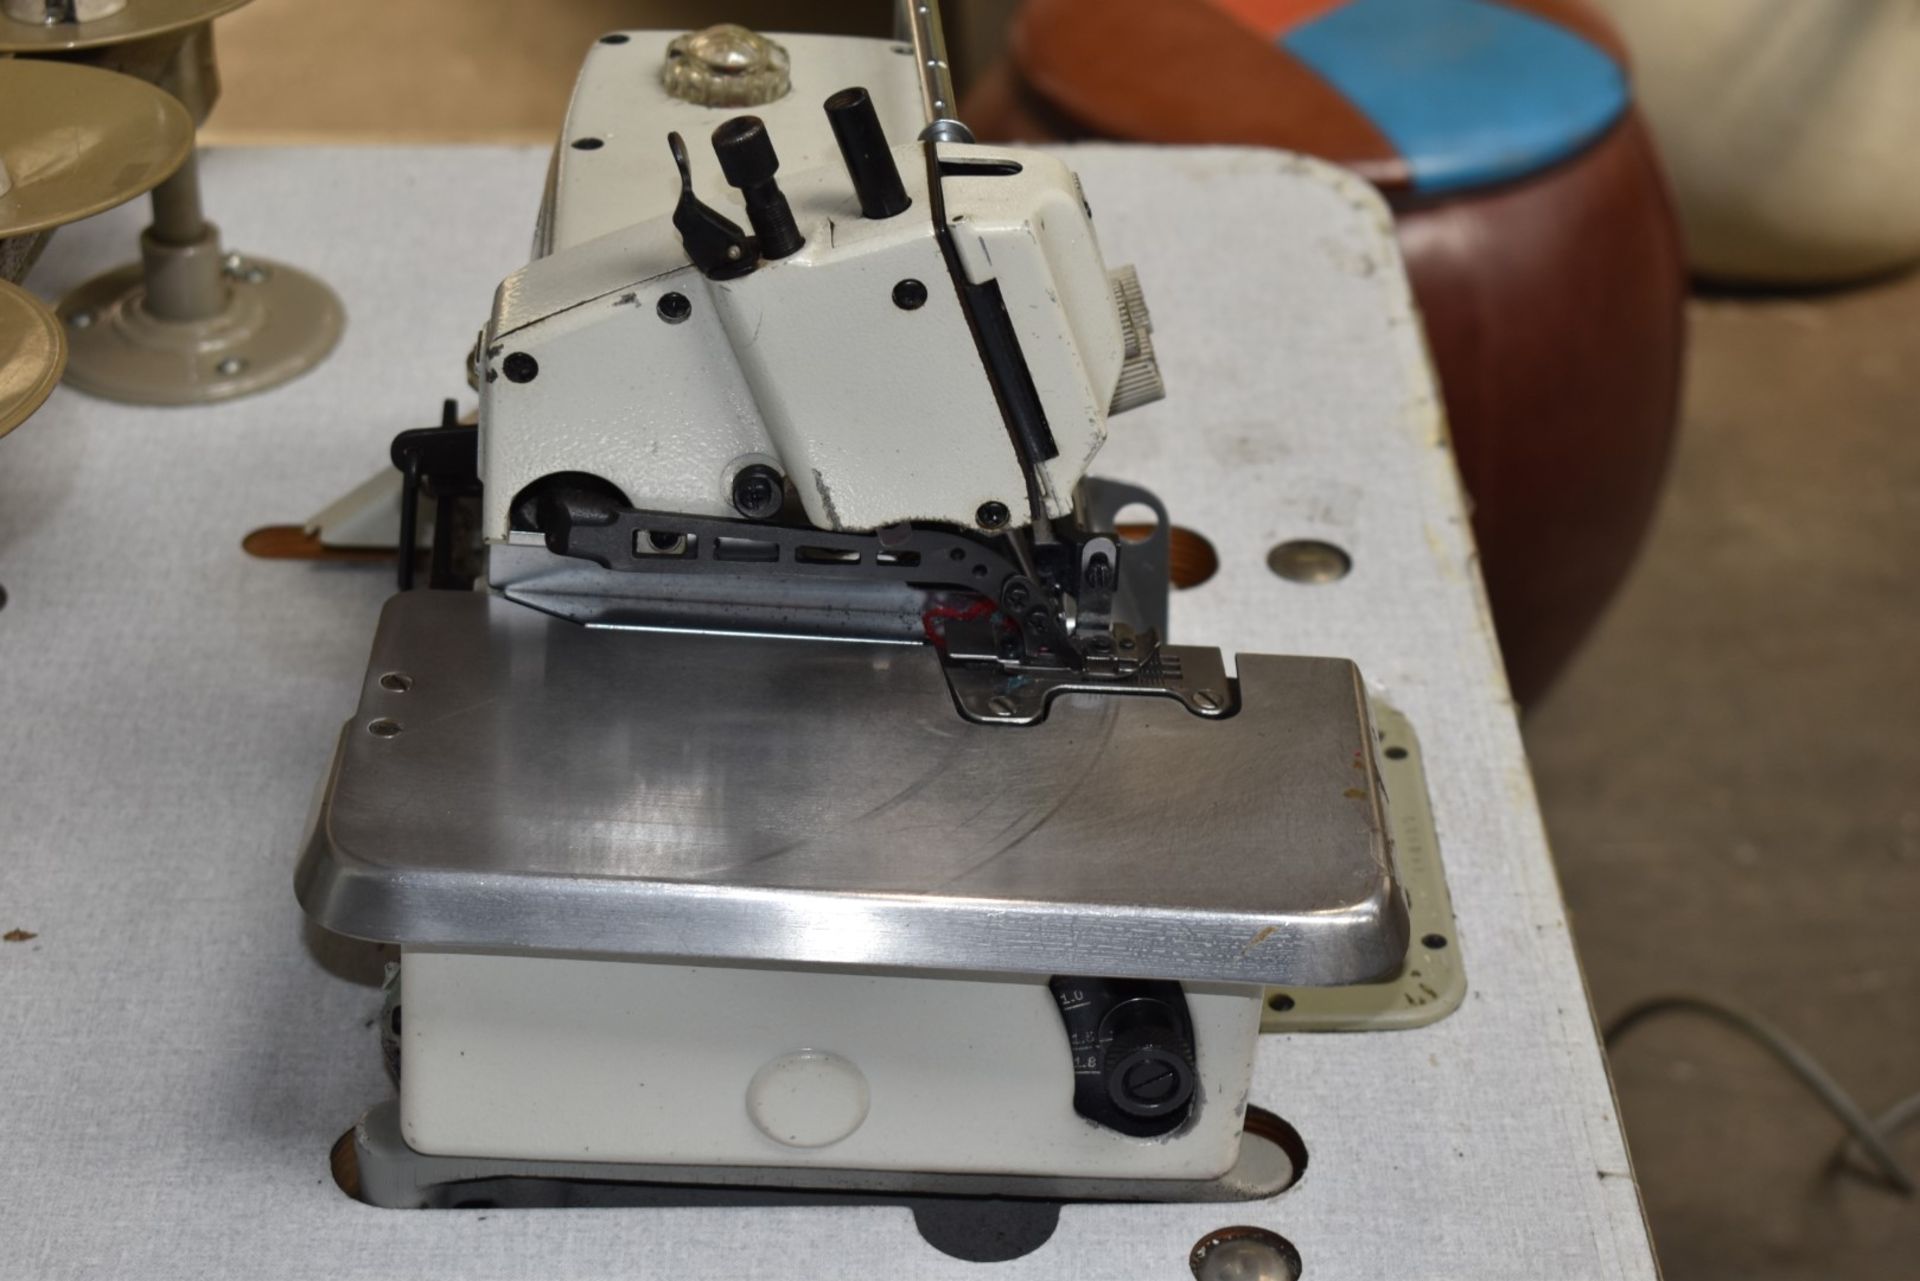 1 x Brother Overlock Industrial Sewing Machine - Model EF4-B531 - Image 16 of 27